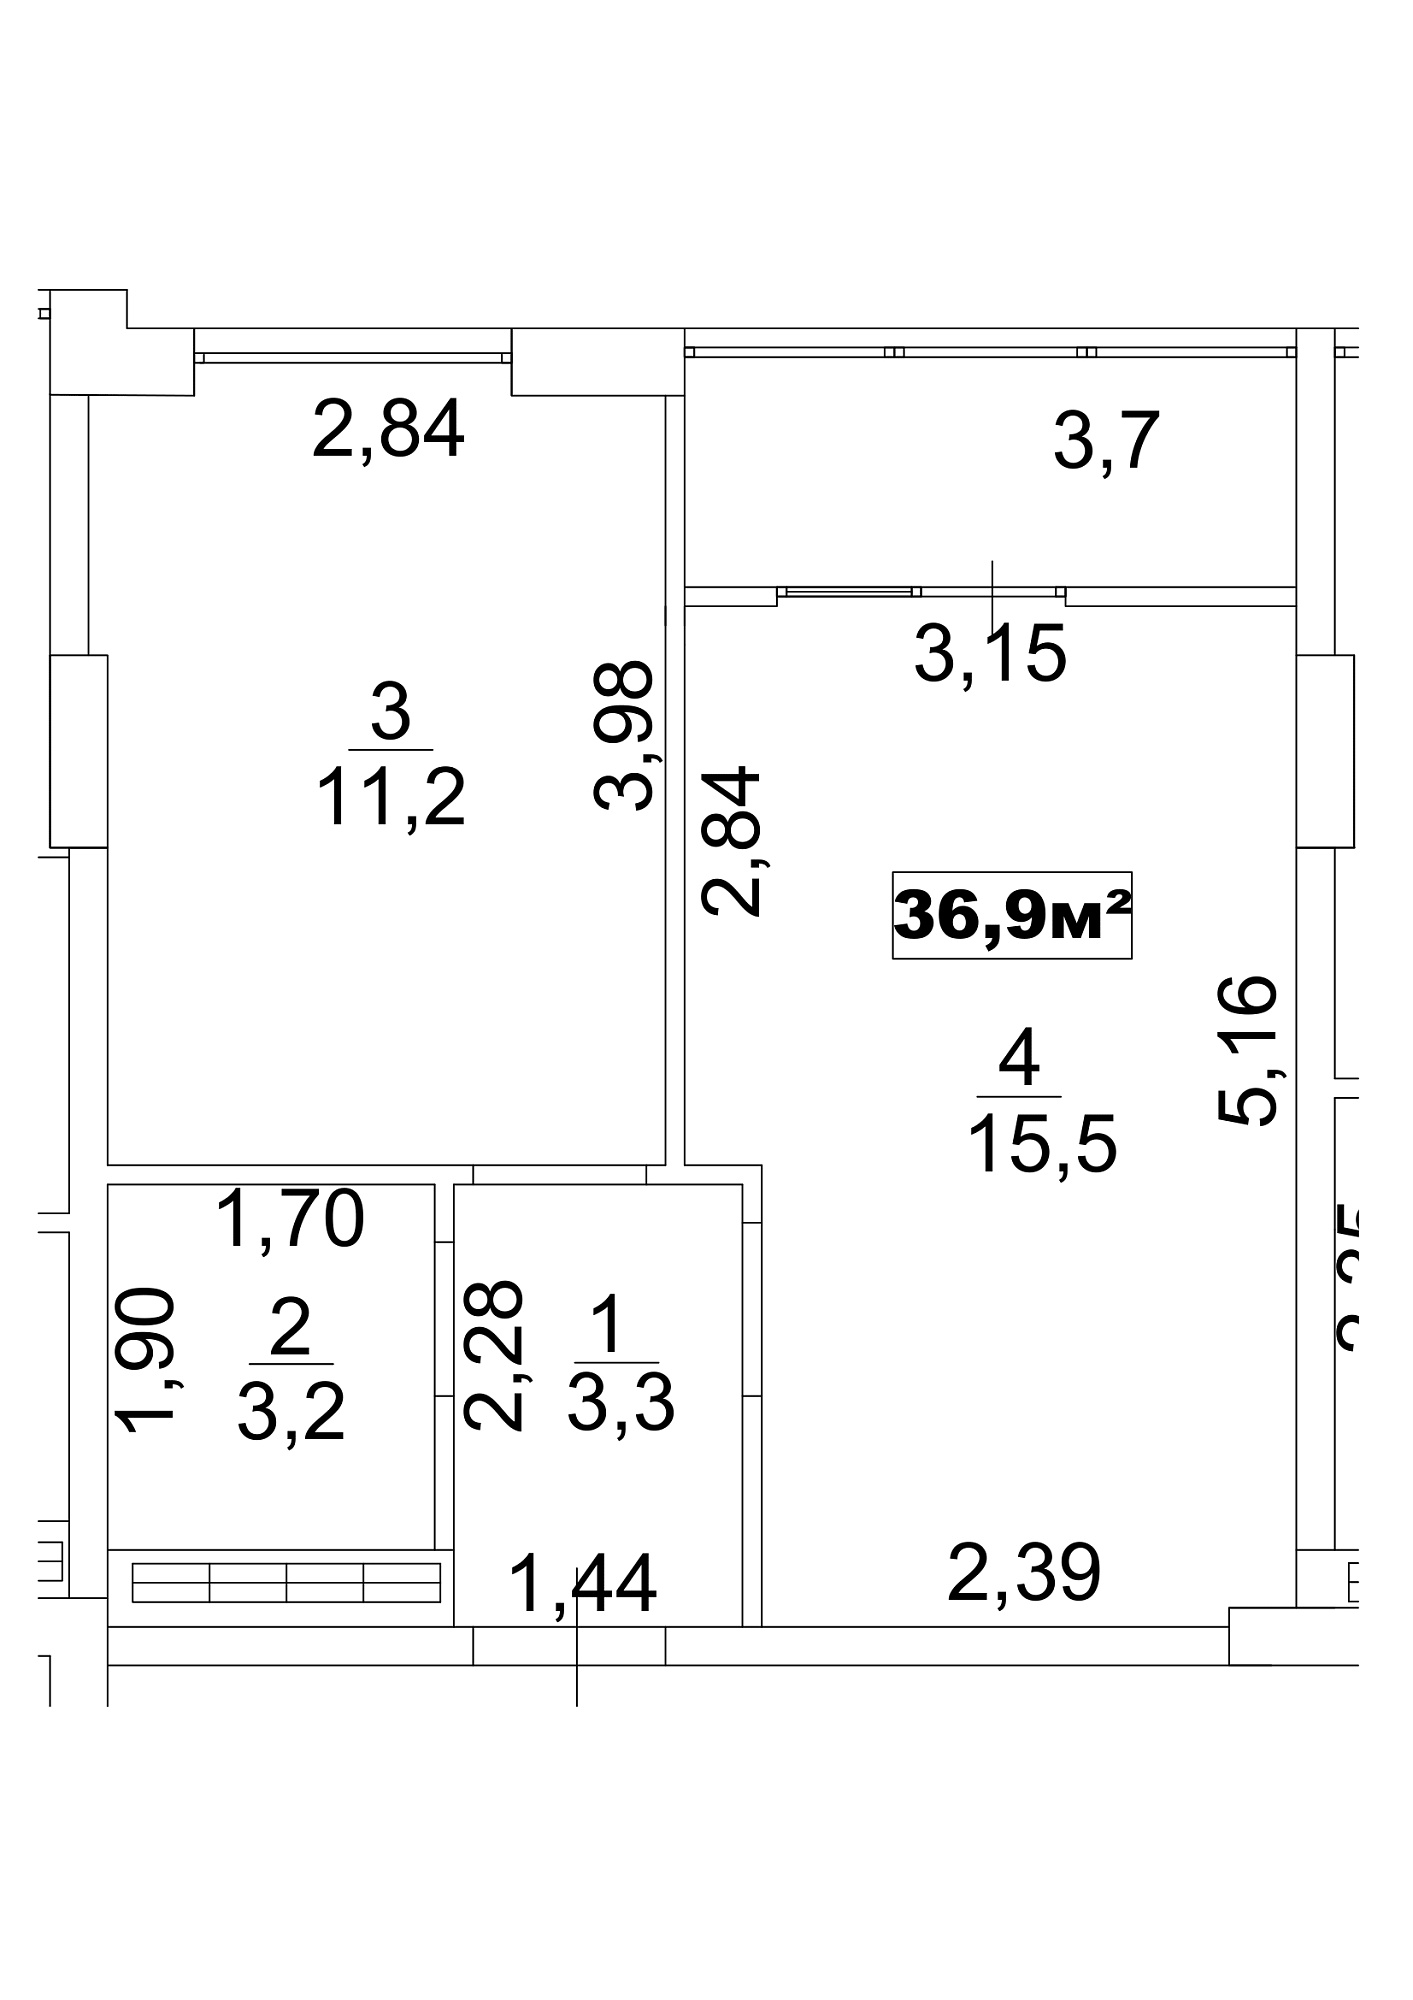 Planning 1-rm flats area 36.9m2, AB-13-02/00012.